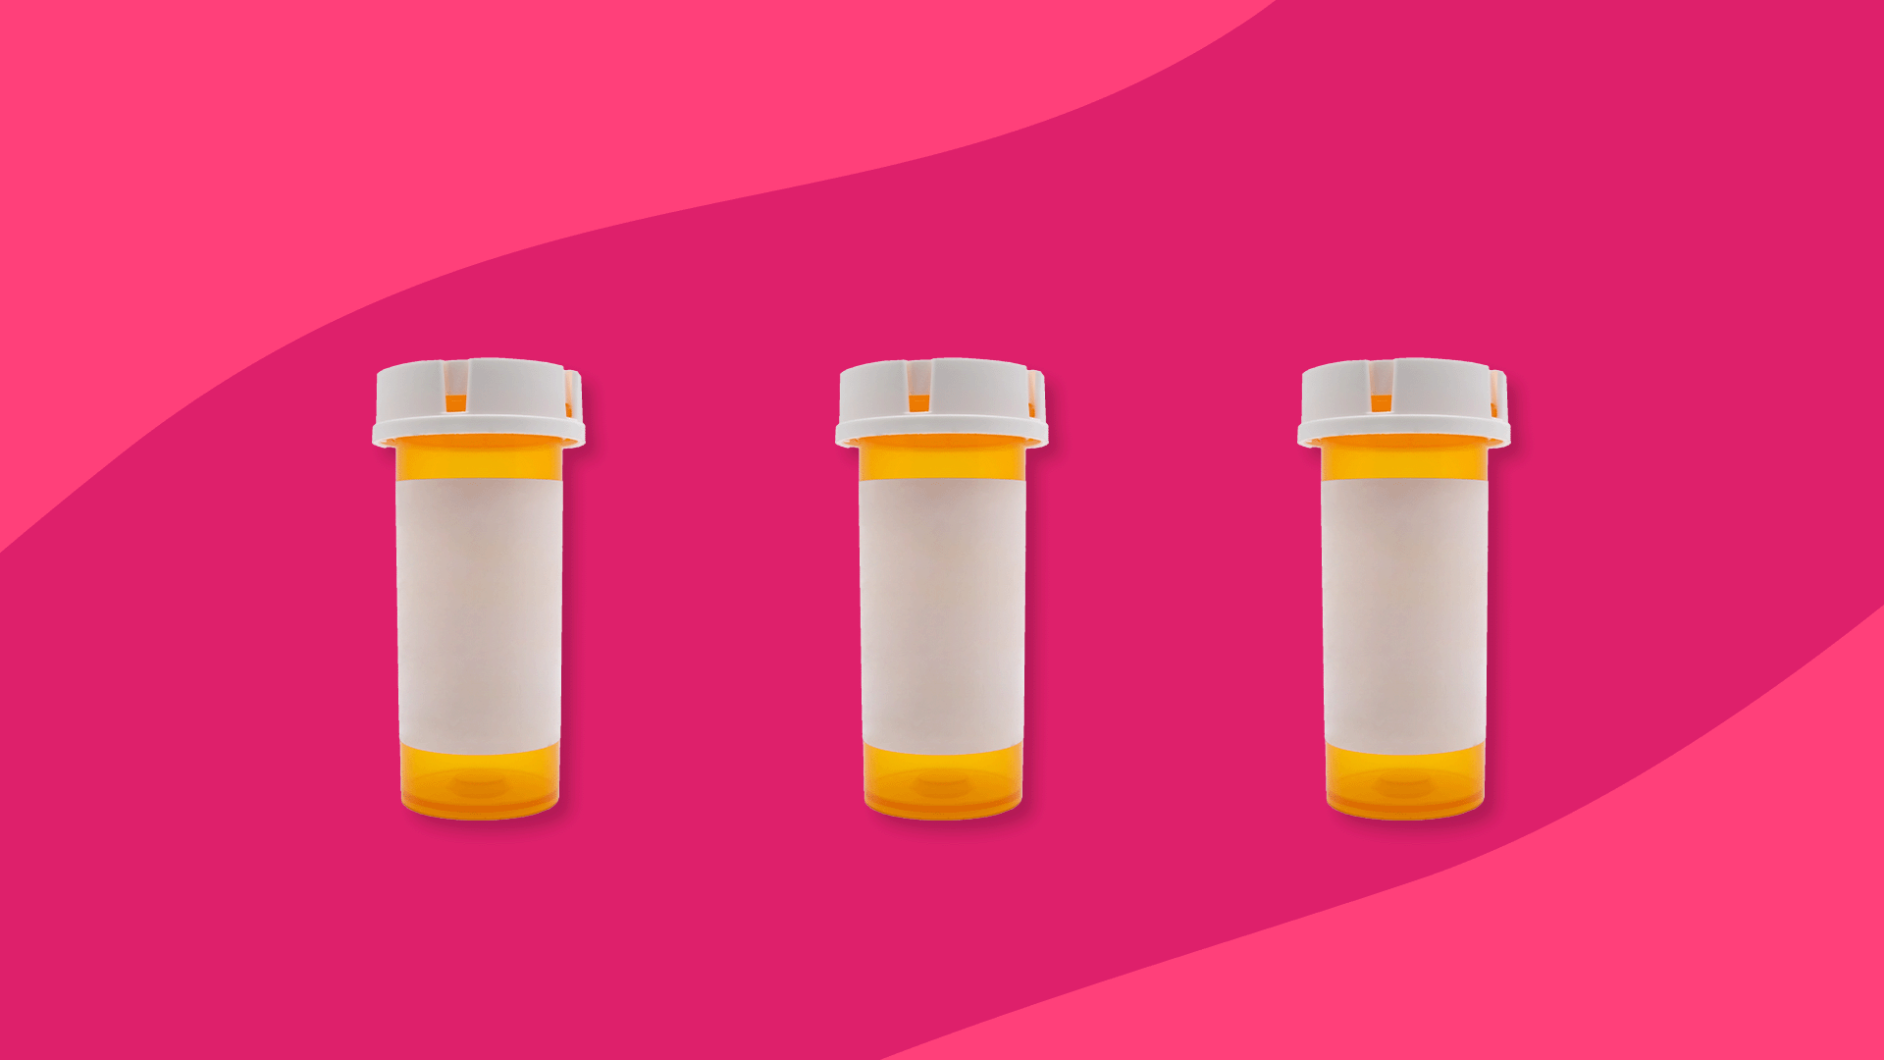 Rx pill bottles: What can I take instead of anastrozole?